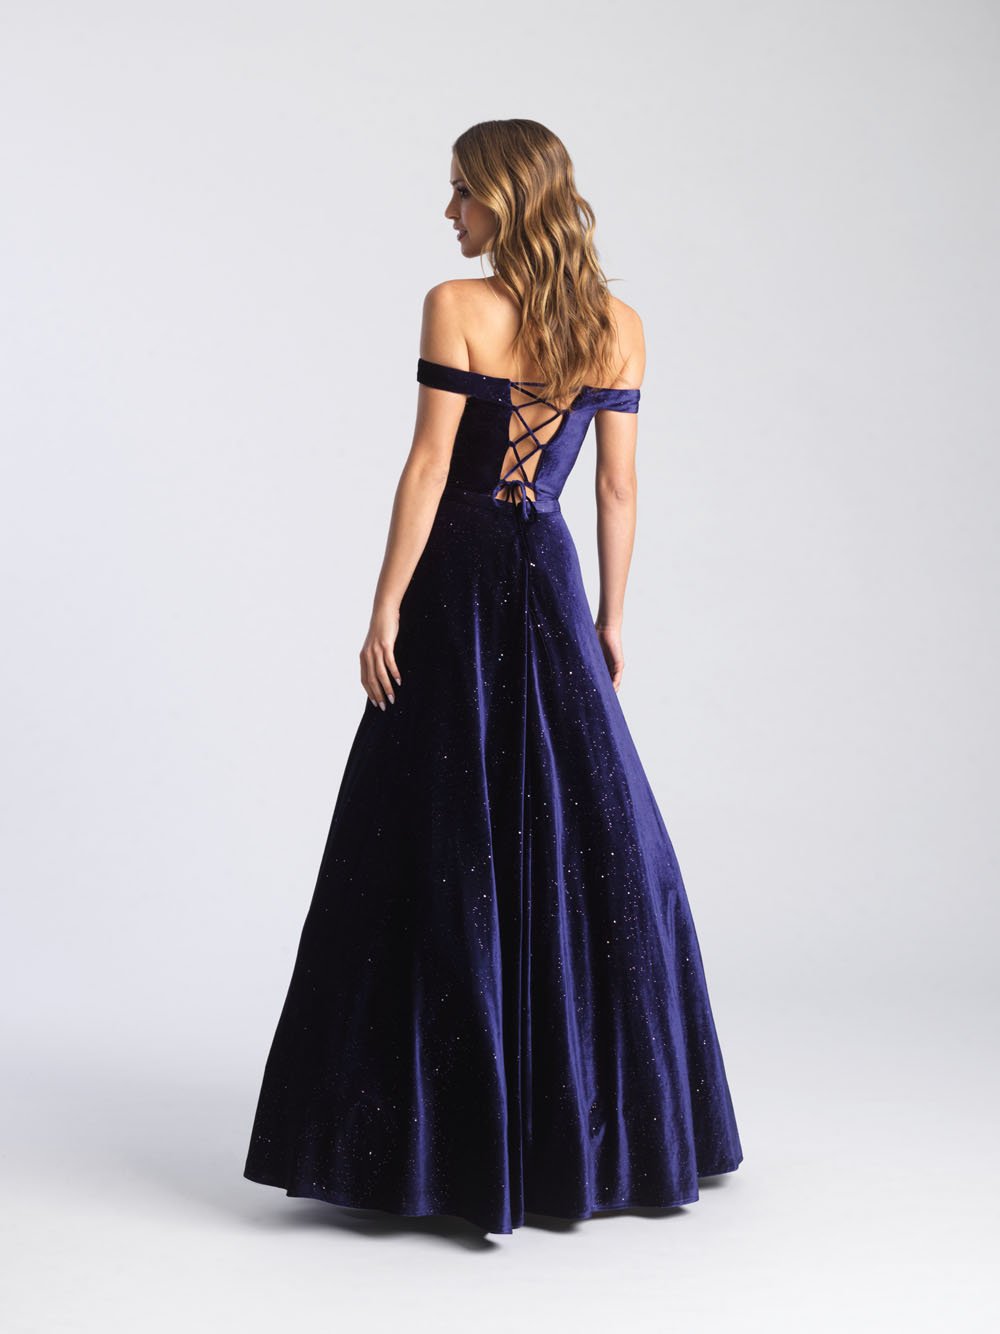 Madison James 20-338 dress images in these colors: Black, Navy, Mauve.